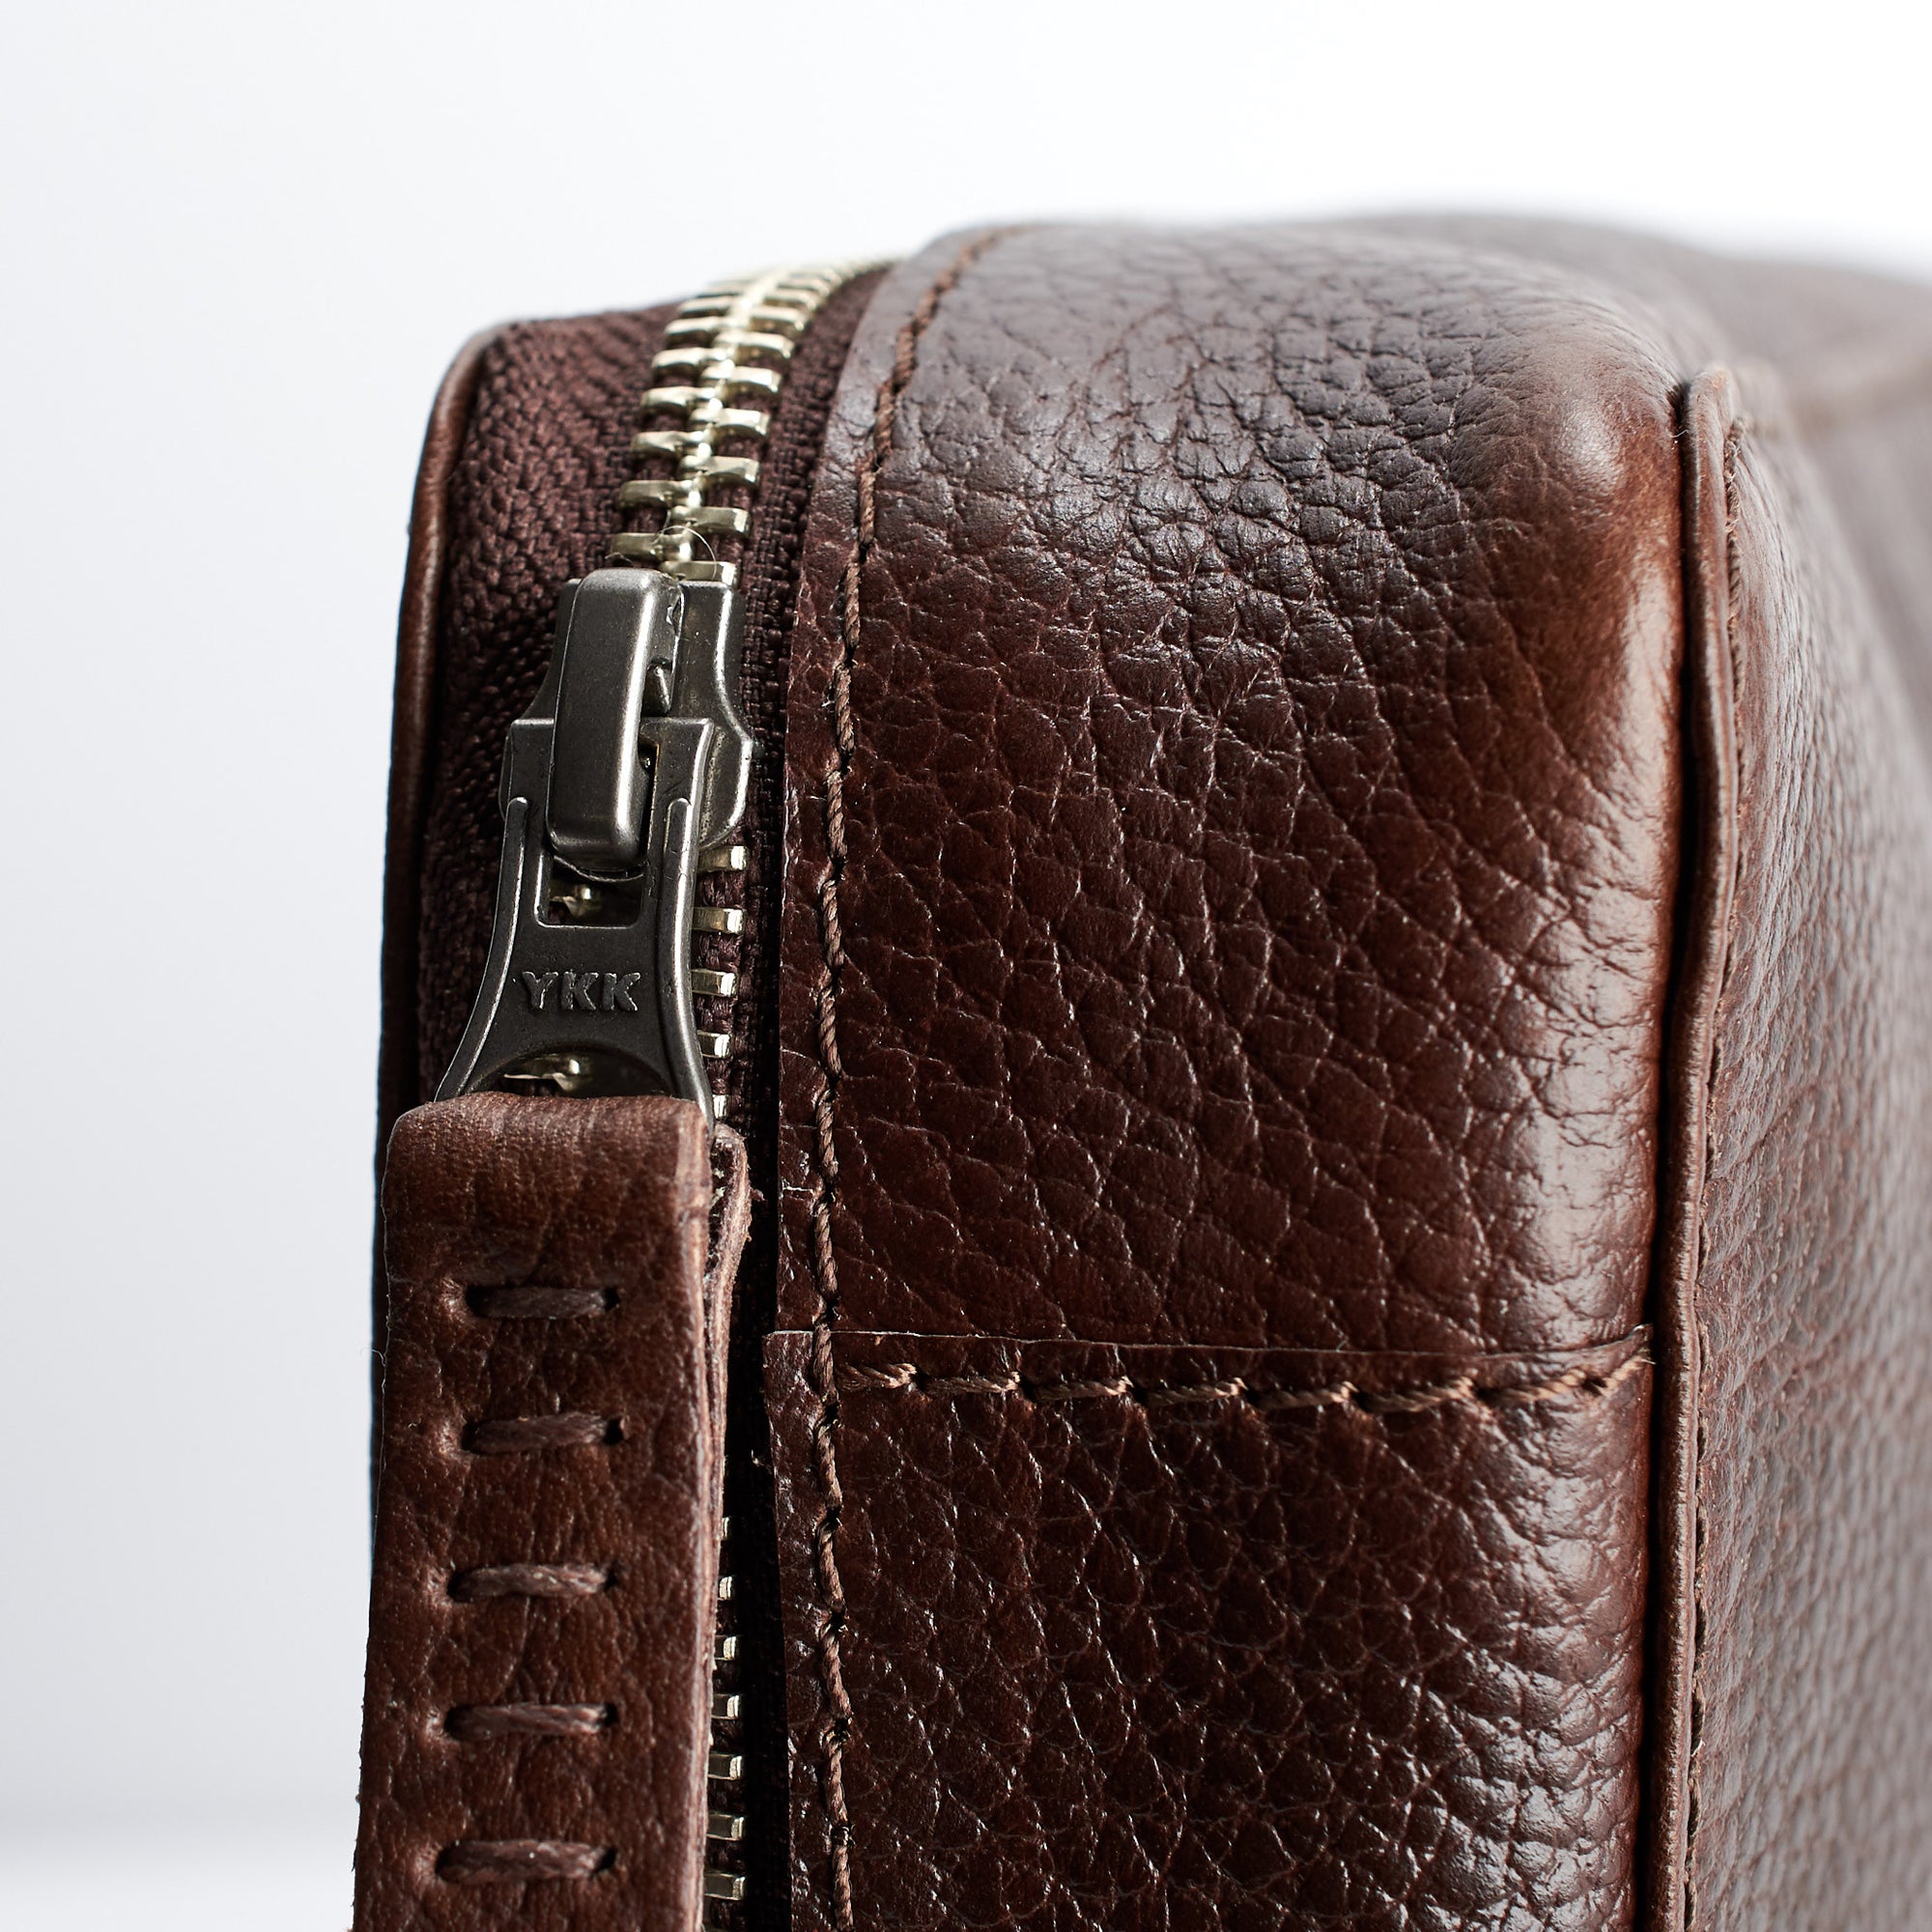 Hand stitched pull tabs. Dark Brown leather tech bags by Capra. Fits iPad Pro with pencil